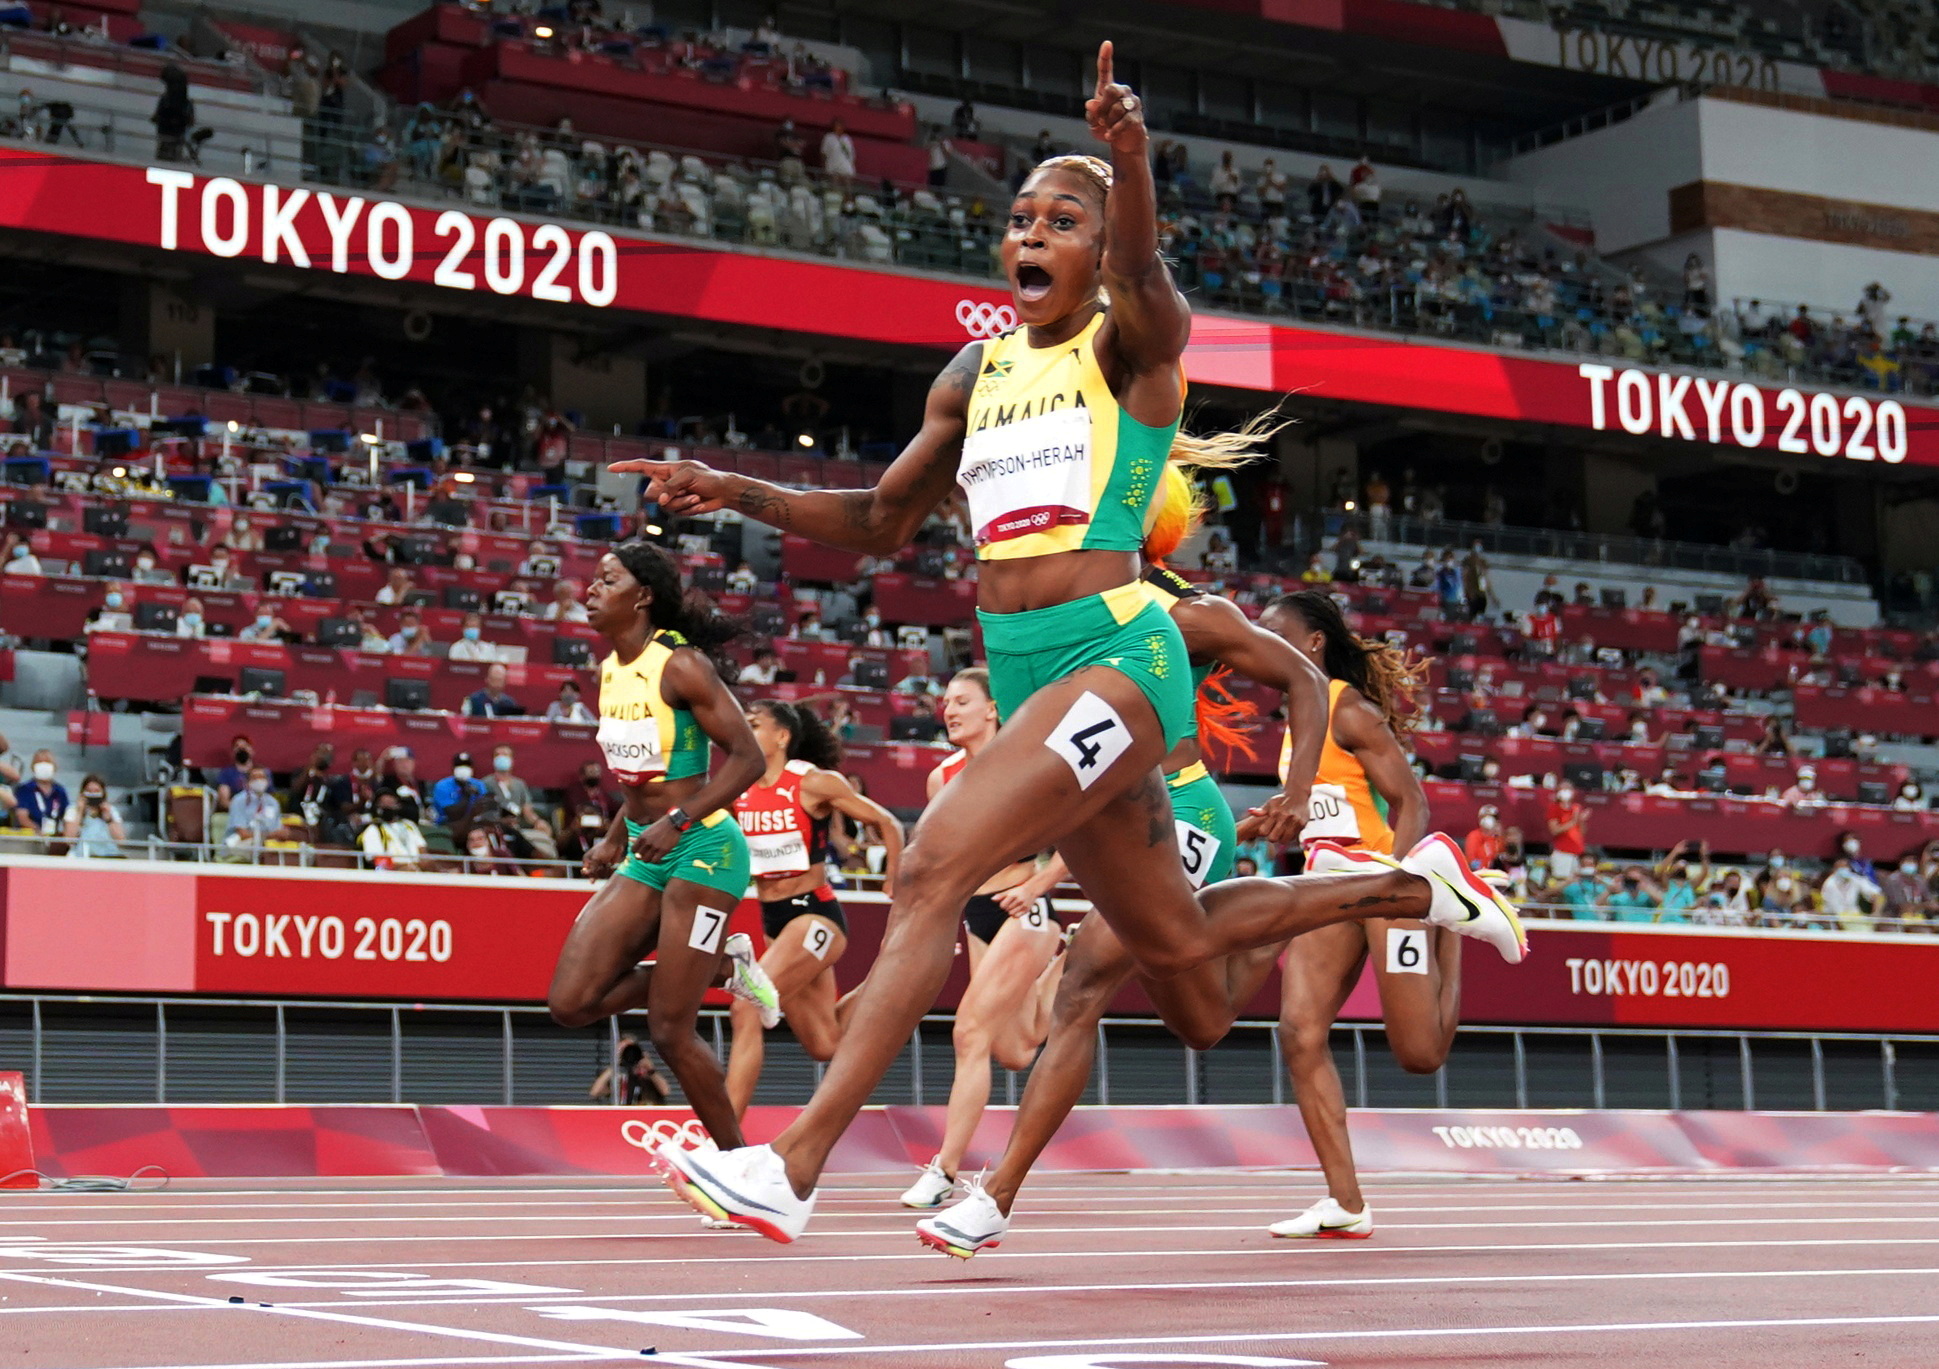 Tokyo 2020 Olympics - Athletics - Women's 100m - Final - OLS - Olympic Stadium, Tokyo, Japan - July 31, 2021. Elaine Thompson-Herah of Jamaica crosses the finish line first to win the gold medal REUTERS/Pawel Kopczynski/File photo       SEARCH "BEST OF THE TOKYO OLYMPICS" FOR ALL PICTURES. TPX IMAGES OF THE DAY.